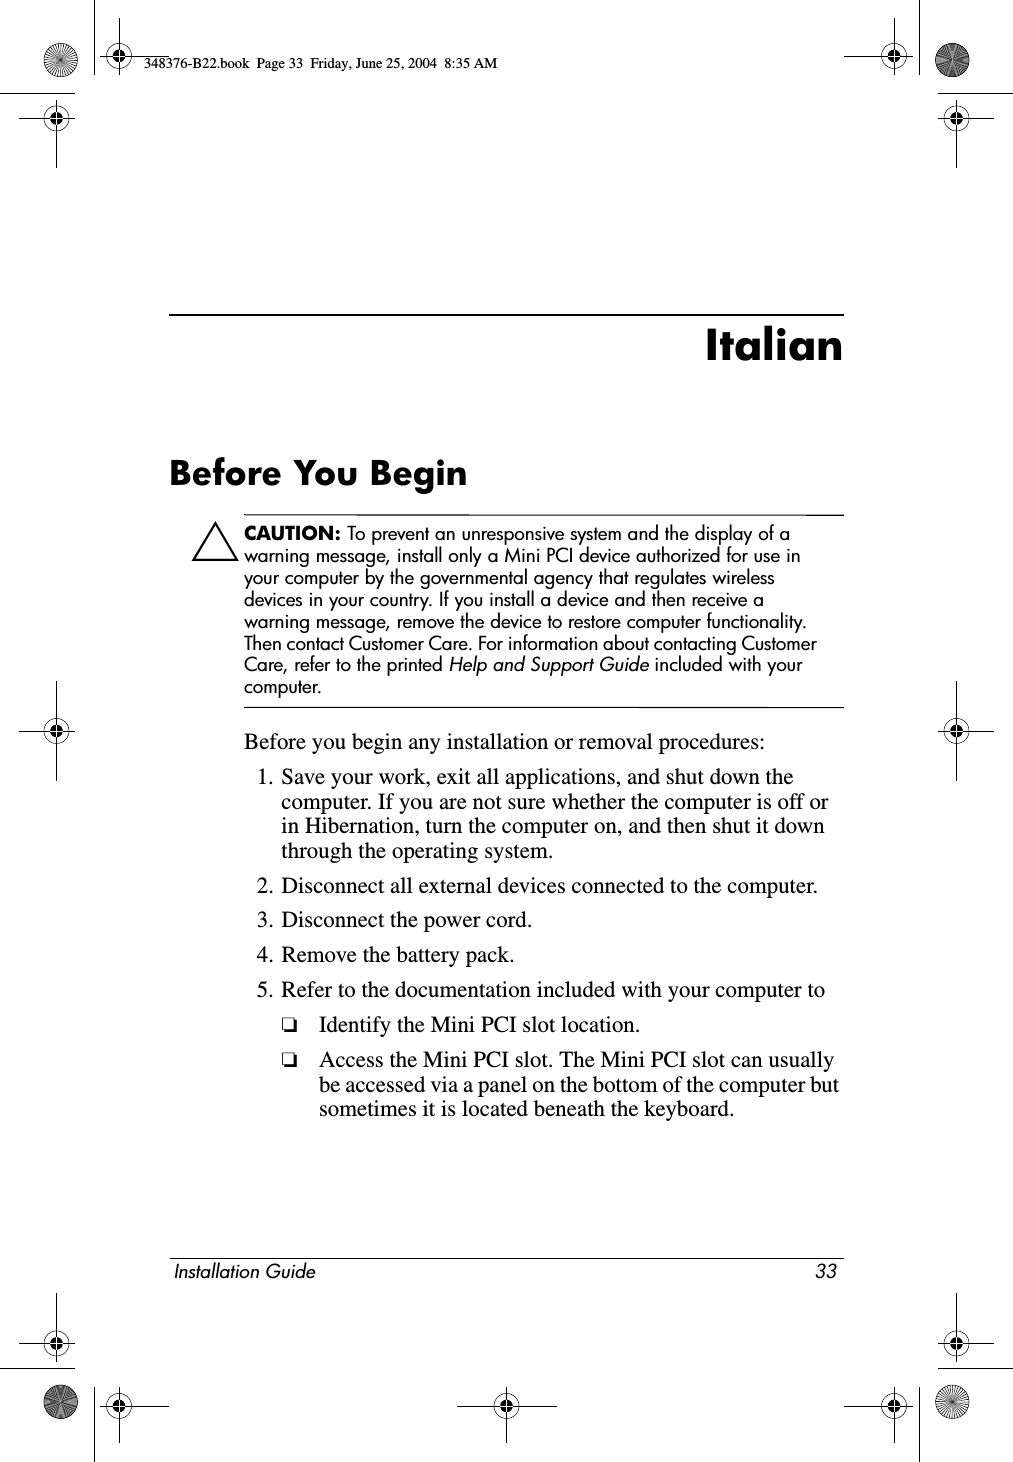 Installation Guide 33ItalianBefore You BeginÄCAUTION: To prevent an unresponsive system and the display of a warning message, install only a Mini PCI device authorized for use in your computer by the governmental agency that regulates wireless devices in your country. If you install a device and then receive a warning message, remove the device to restore computer functionality. Then contact Customer Care. For information about contacting Customer Care, refer to the printed Help and Support Guide included with your computer.Before you begin any installation or removal procedures:1. Save your work, exit all applications, and shut down the computer. If you are not sure whether the computer is off or in Hibernation, turn the computer on, and then shut it down through the operating system.2. Disconnect all external devices connected to the computer.3. Disconnect the power cord.4. Remove the battery pack.5. Refer to the documentation included with your computer to❏Identify the Mini PCI slot location.❏Access the Mini PCI slot. The Mini PCI slot can usually be accessed via a panel on the bottom of the computer but sometimes it is located beneath the keyboard.348376-B22.book  Page 33  Friday, June 25, 2004  8:35 AM